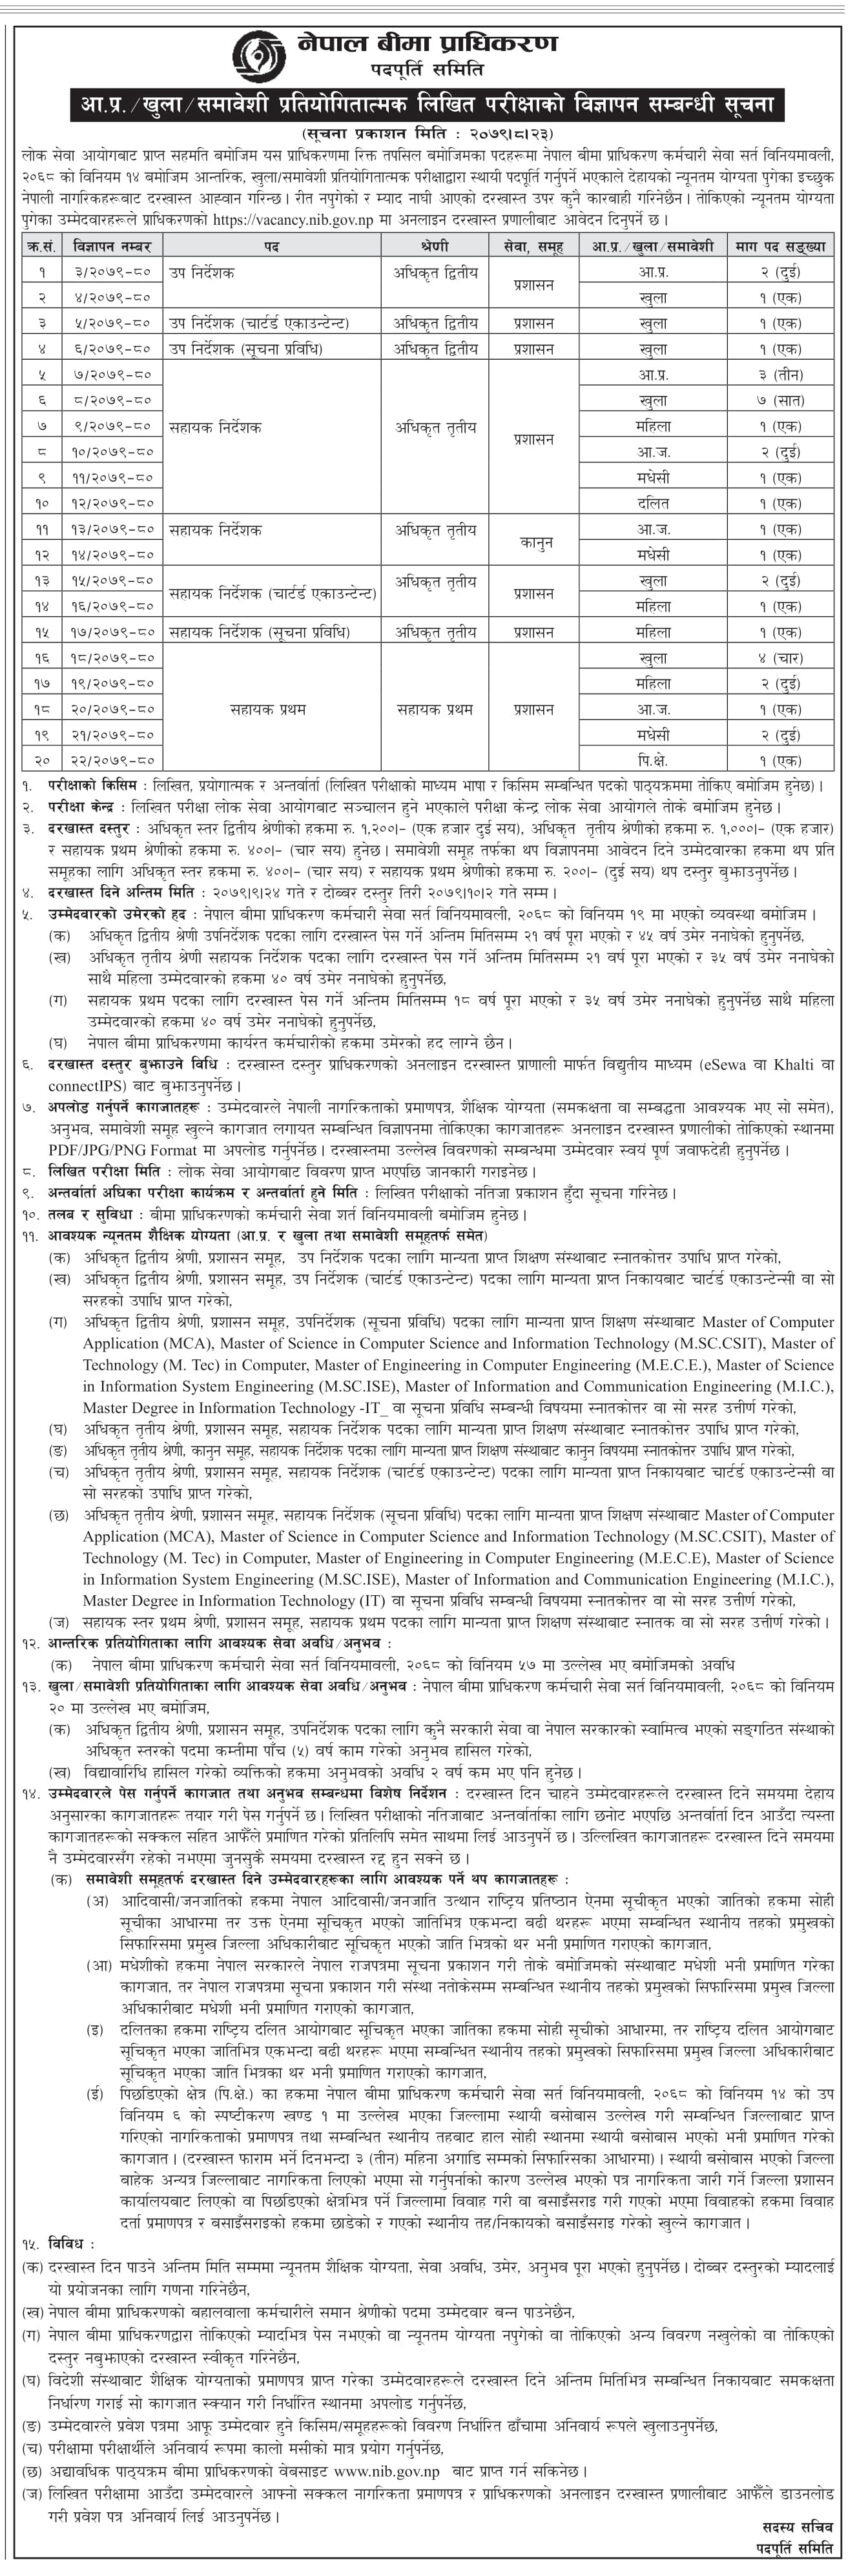 Nepali Insurance Authority (Nepal Bima Pradhikaran) has published the job vacancy of 36 law and administrative workers for the assistant first, officer Second and officer third.